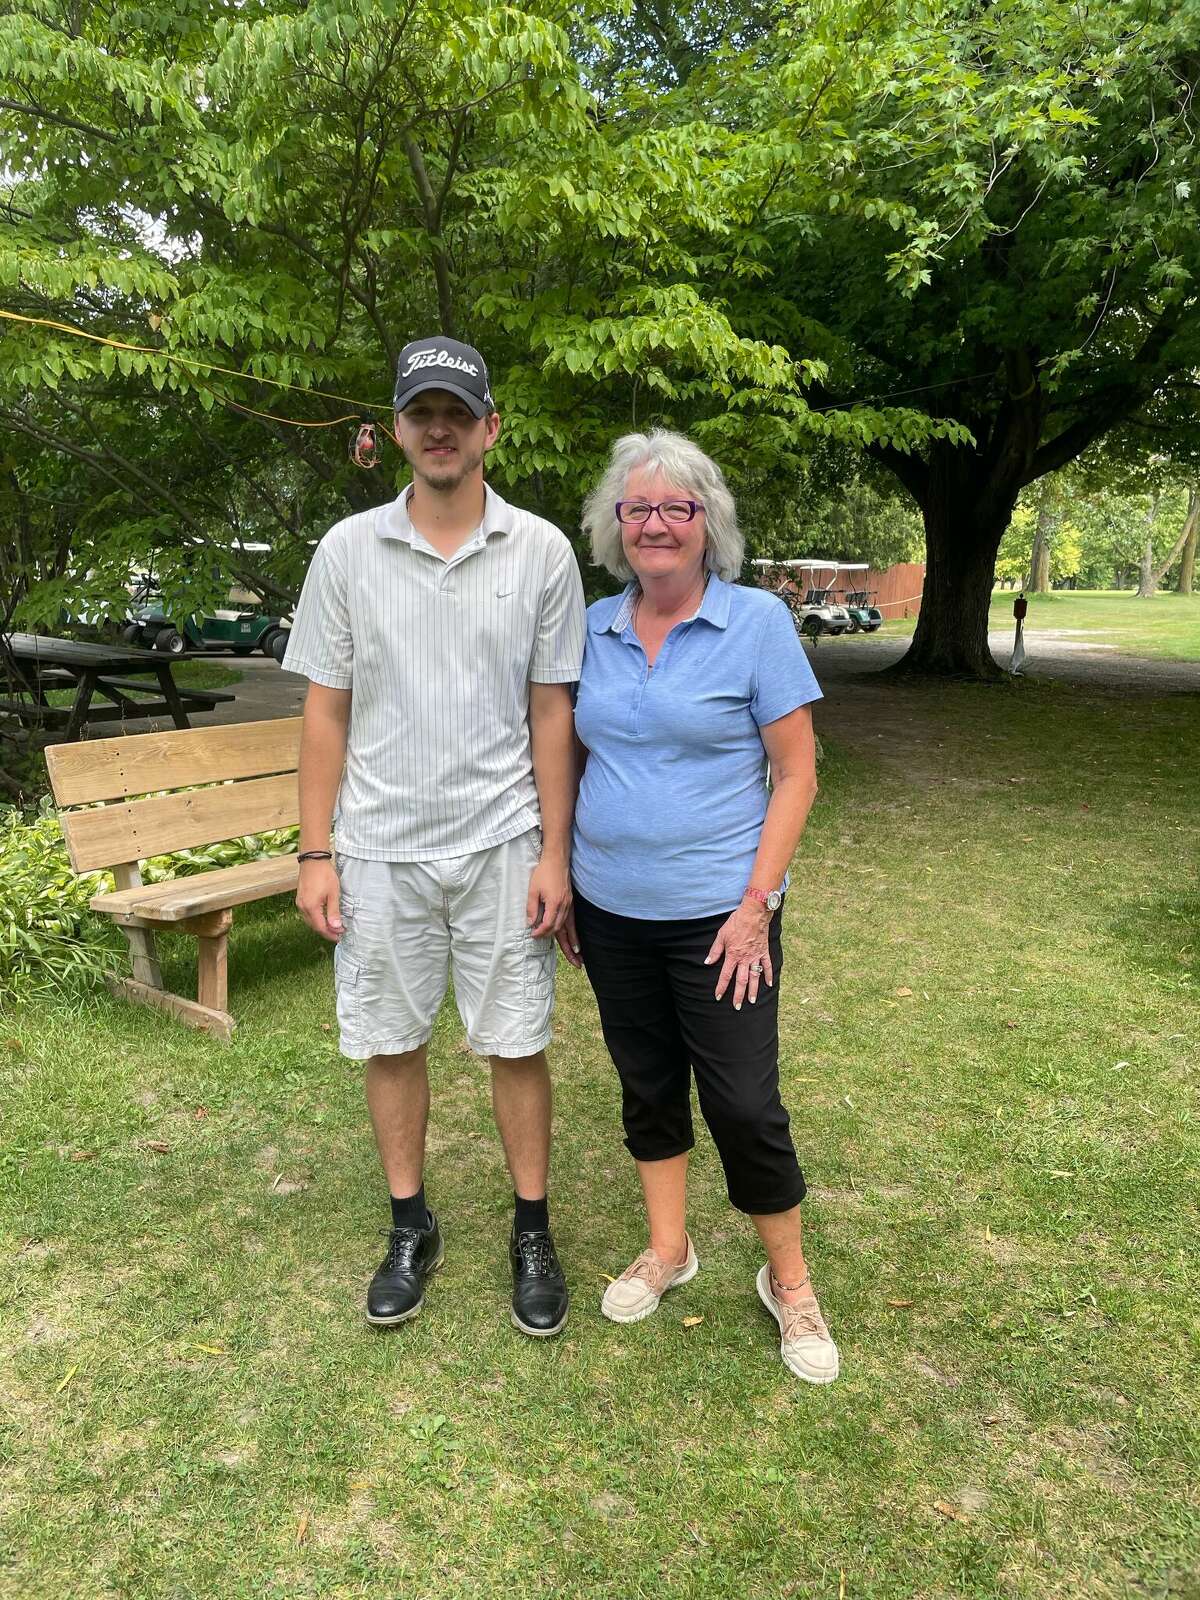 The Caseville Golf Course recently held their club championship. Skiler Filion, left, won the championship flight. Shelia Vigenski, right, won the women's flight. Filion won with a 36-hole score of 147. Matt McCrimmon finished second, shooting 157. The first flight winner was Conrad Vigenski, shooting 183. Bill Gustafson finished second, shooting 187. Shelia Vigenski won the women's flight, shooting 204.